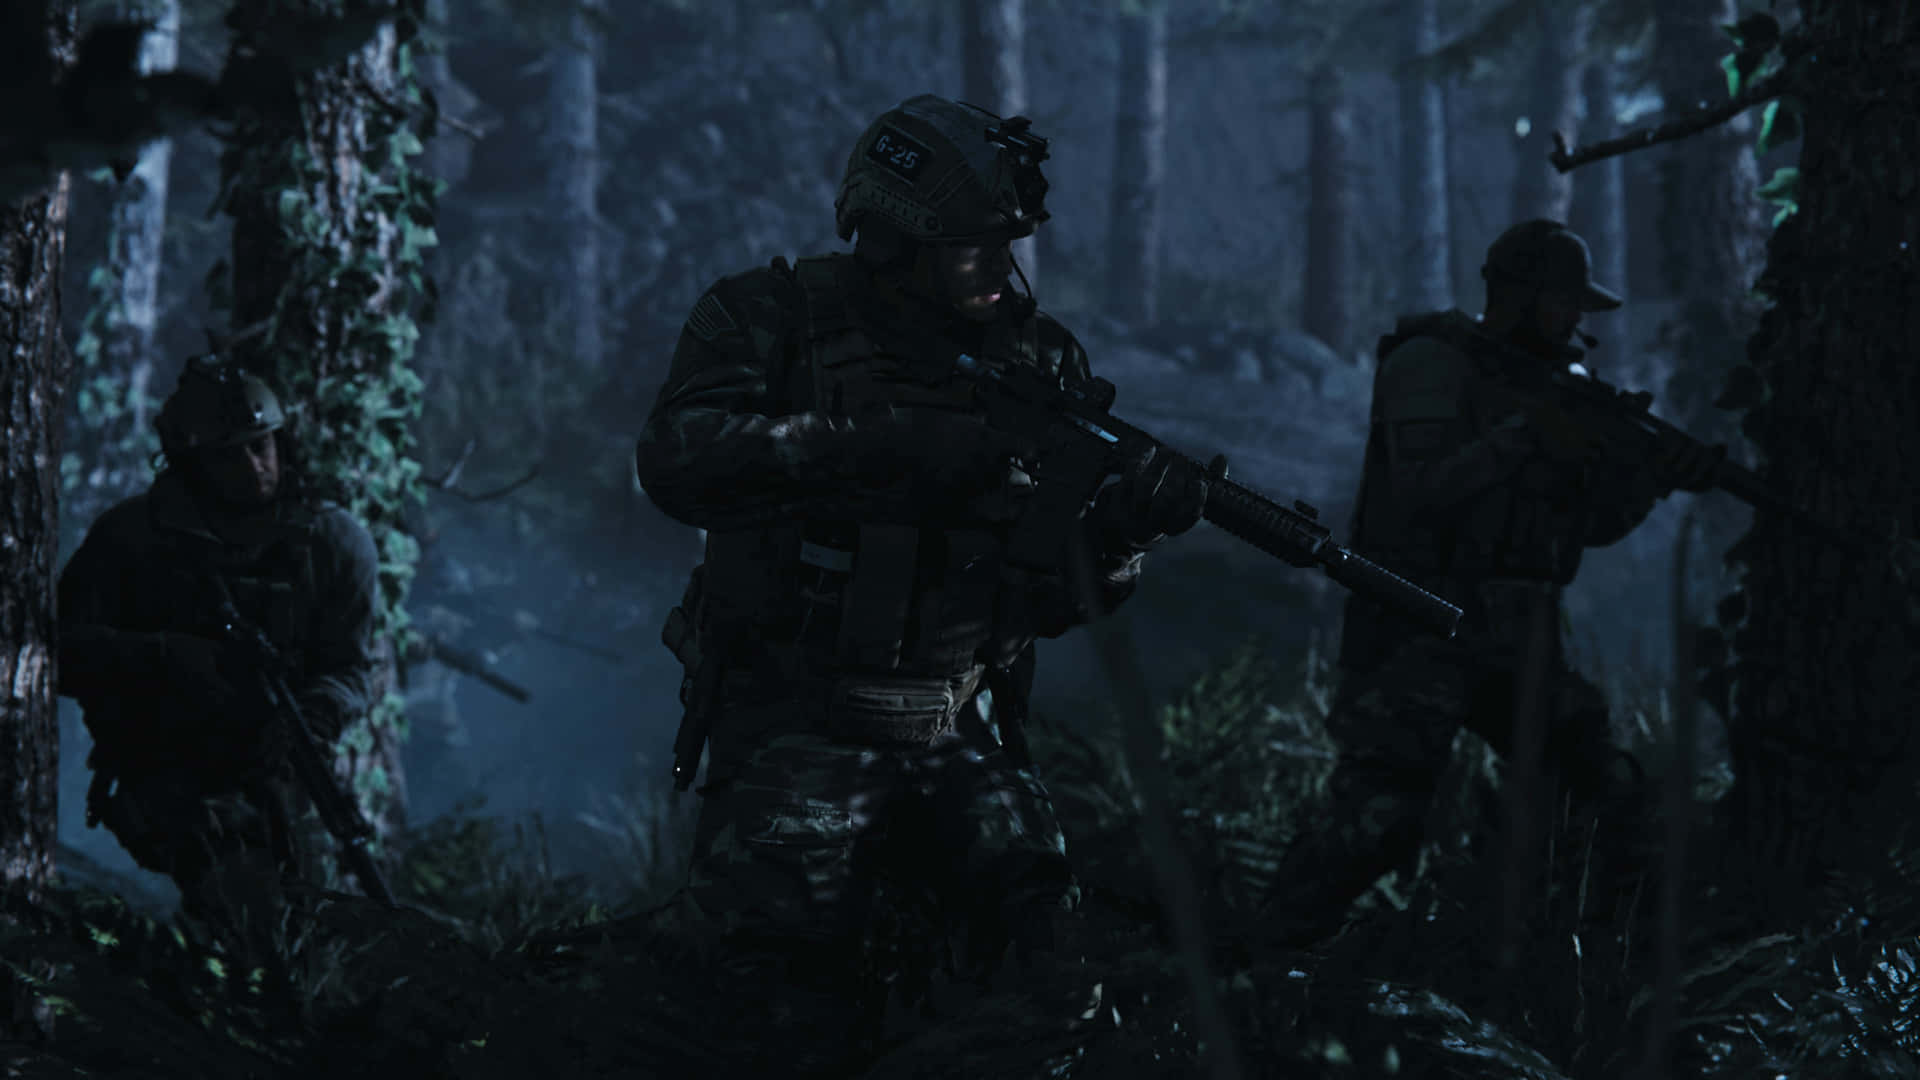 Deltai Episka Strider Med Call Of Duty Modern Warfare. (note: In Swedish, The Title Of The Game Is Translated As 